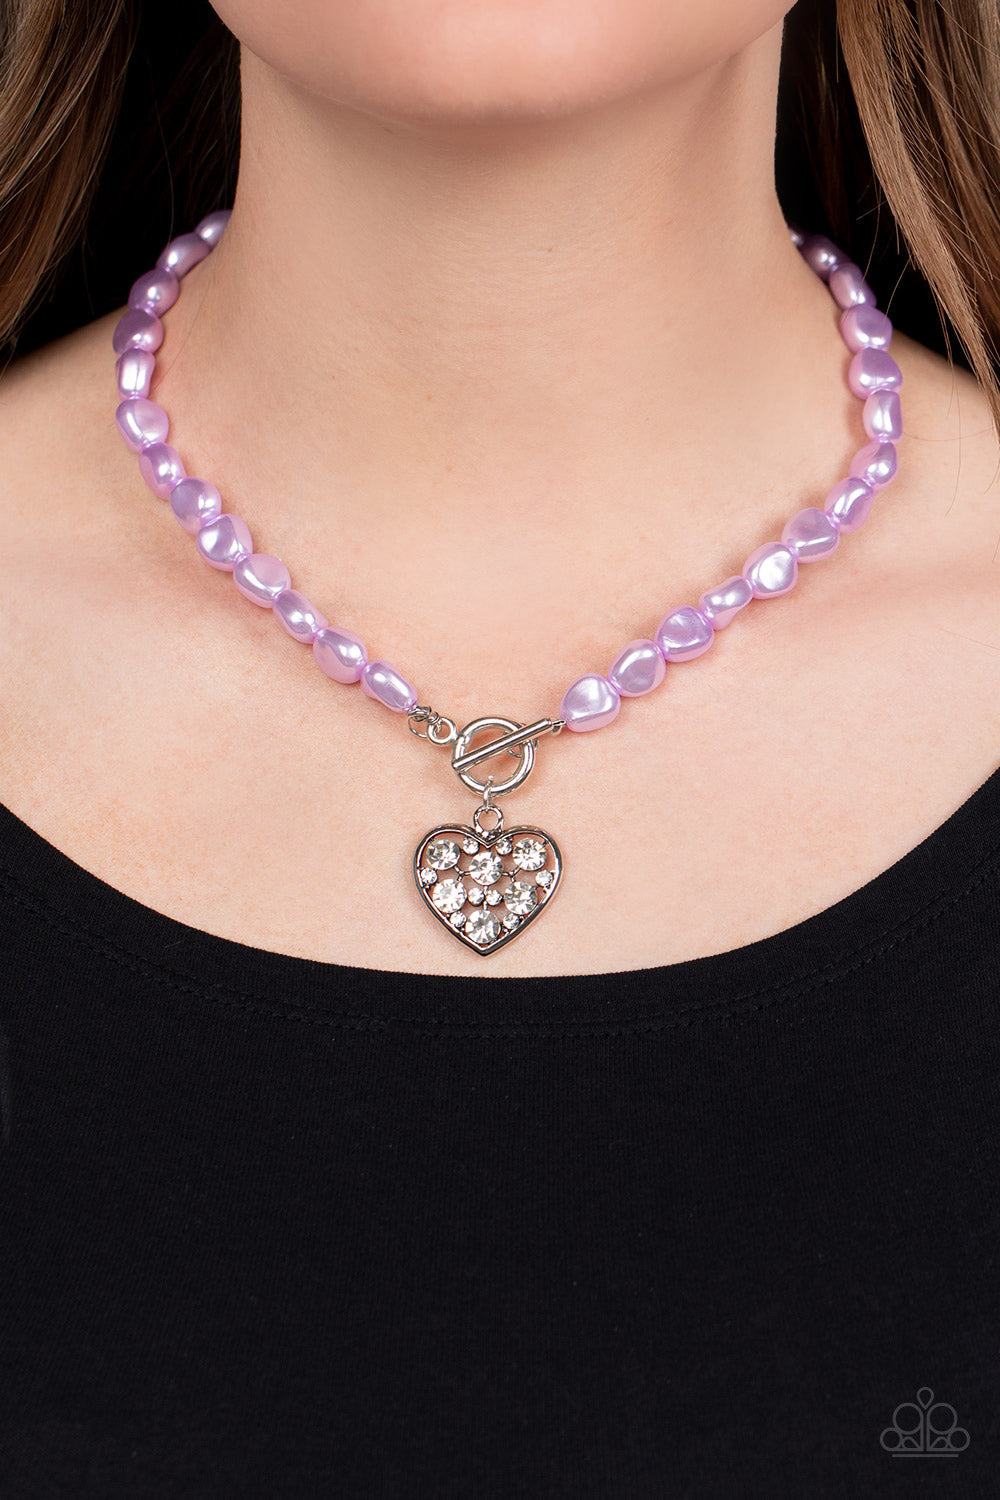 Color Me Smitten - Purple Imperfect Pearls/White Rhinestone Encrusted Heart Pendant Paparazzi Necklace & matching earrings